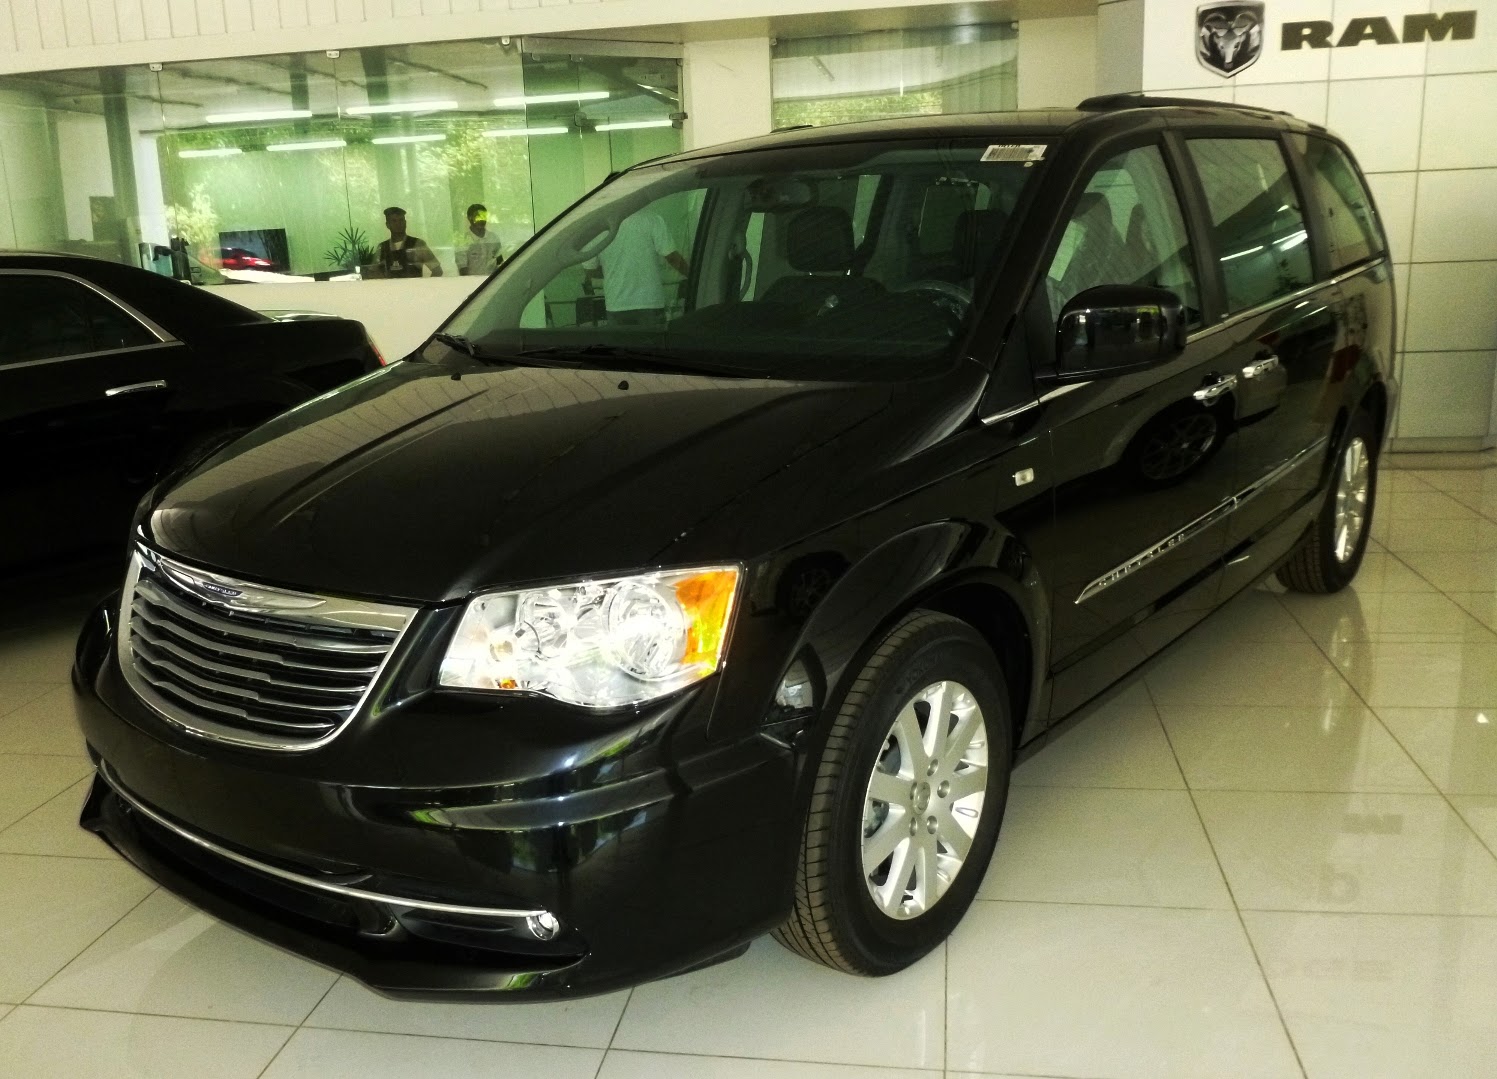 Recall for chrysler town and country #3